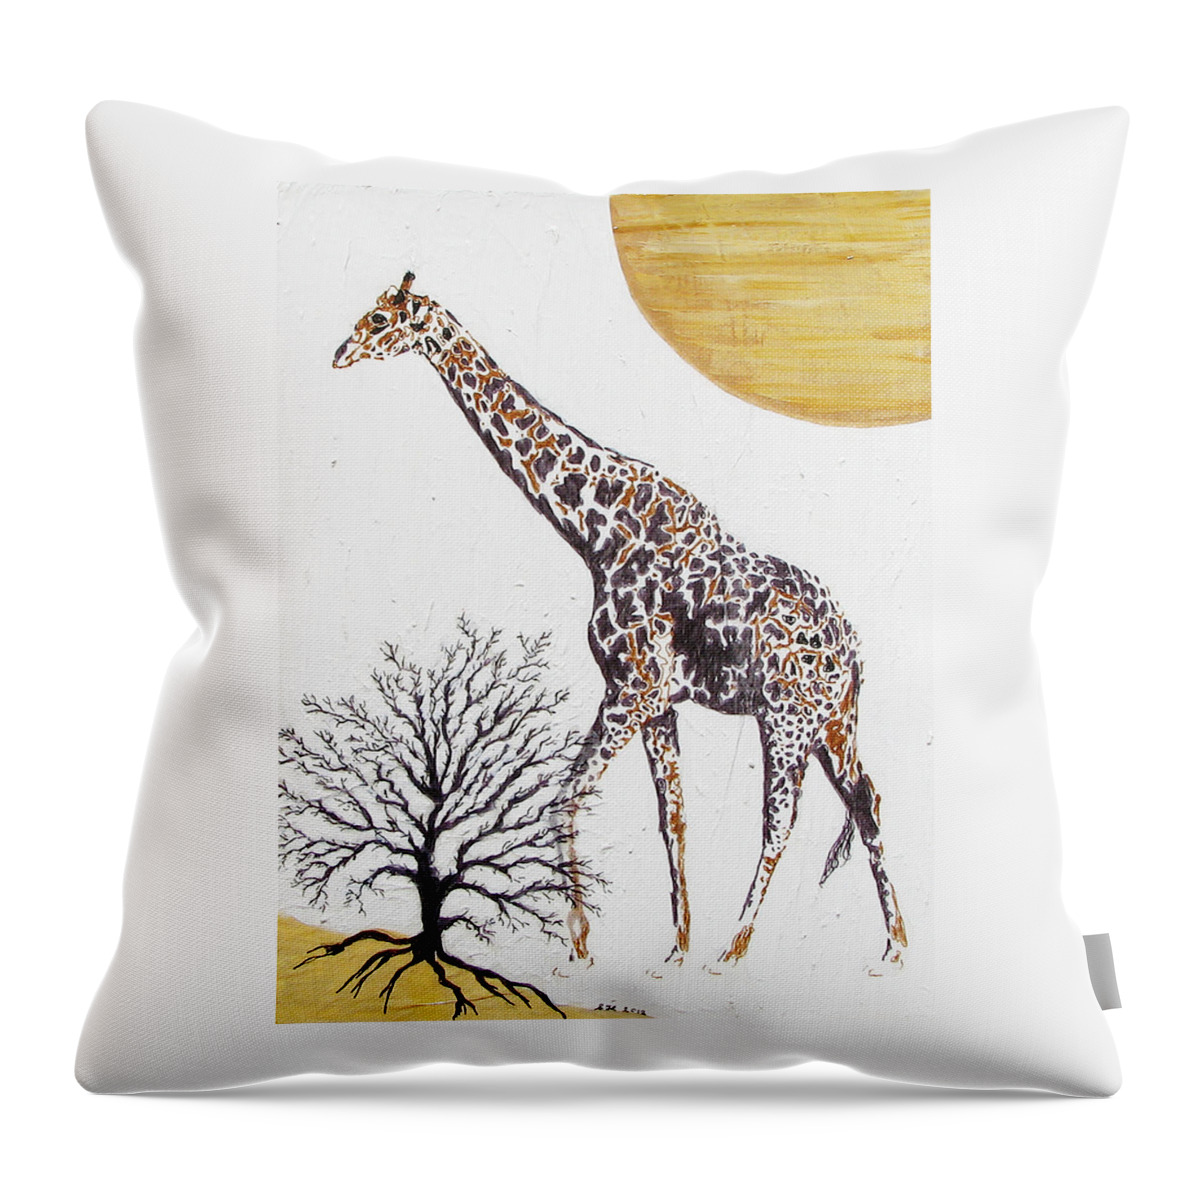 Giraffe Throw Pillow featuring the painting Going Solo by Stephanie Grant